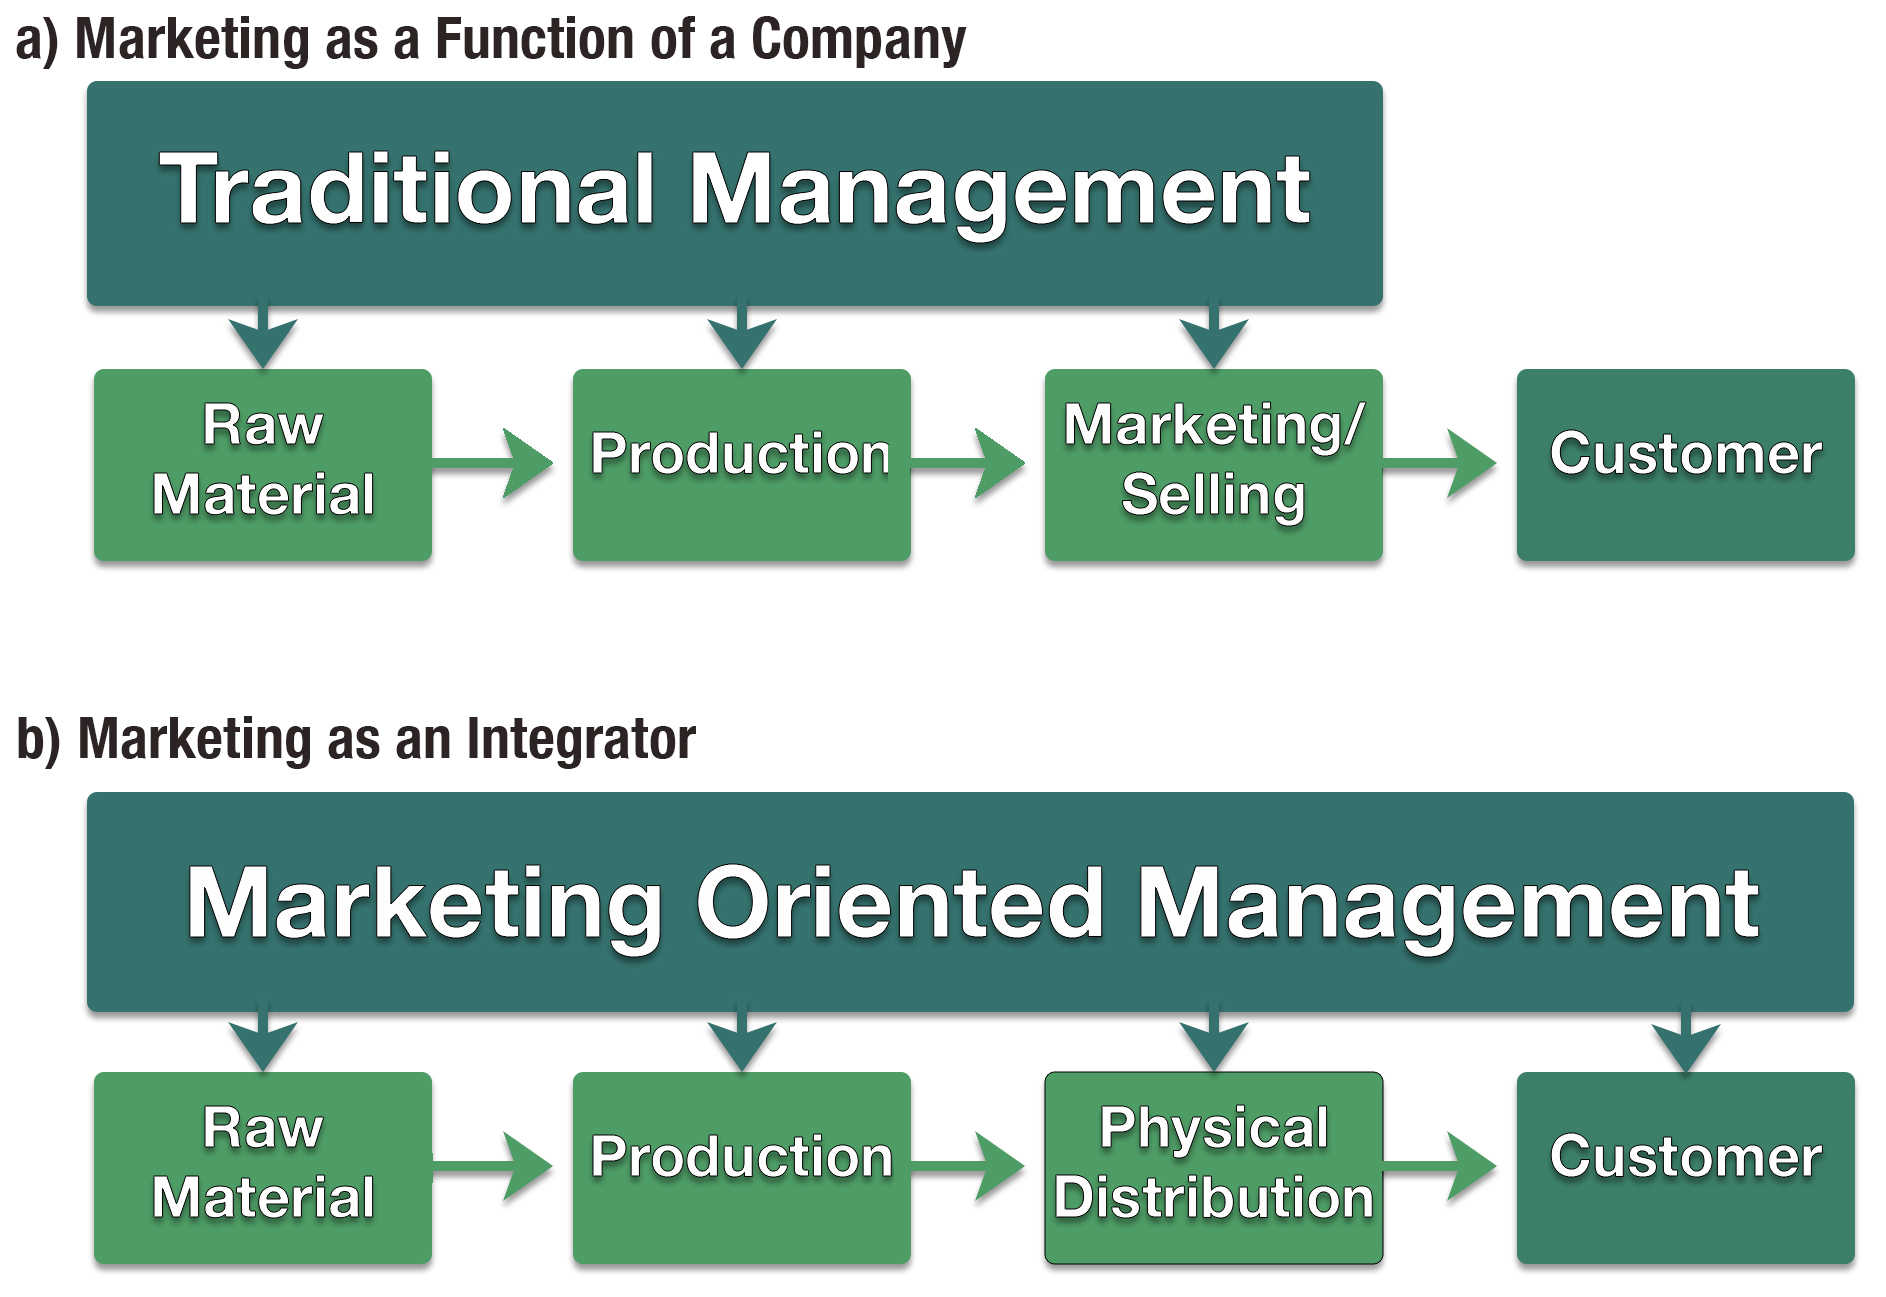 Marketing as a Function of the Company and as an Integrator